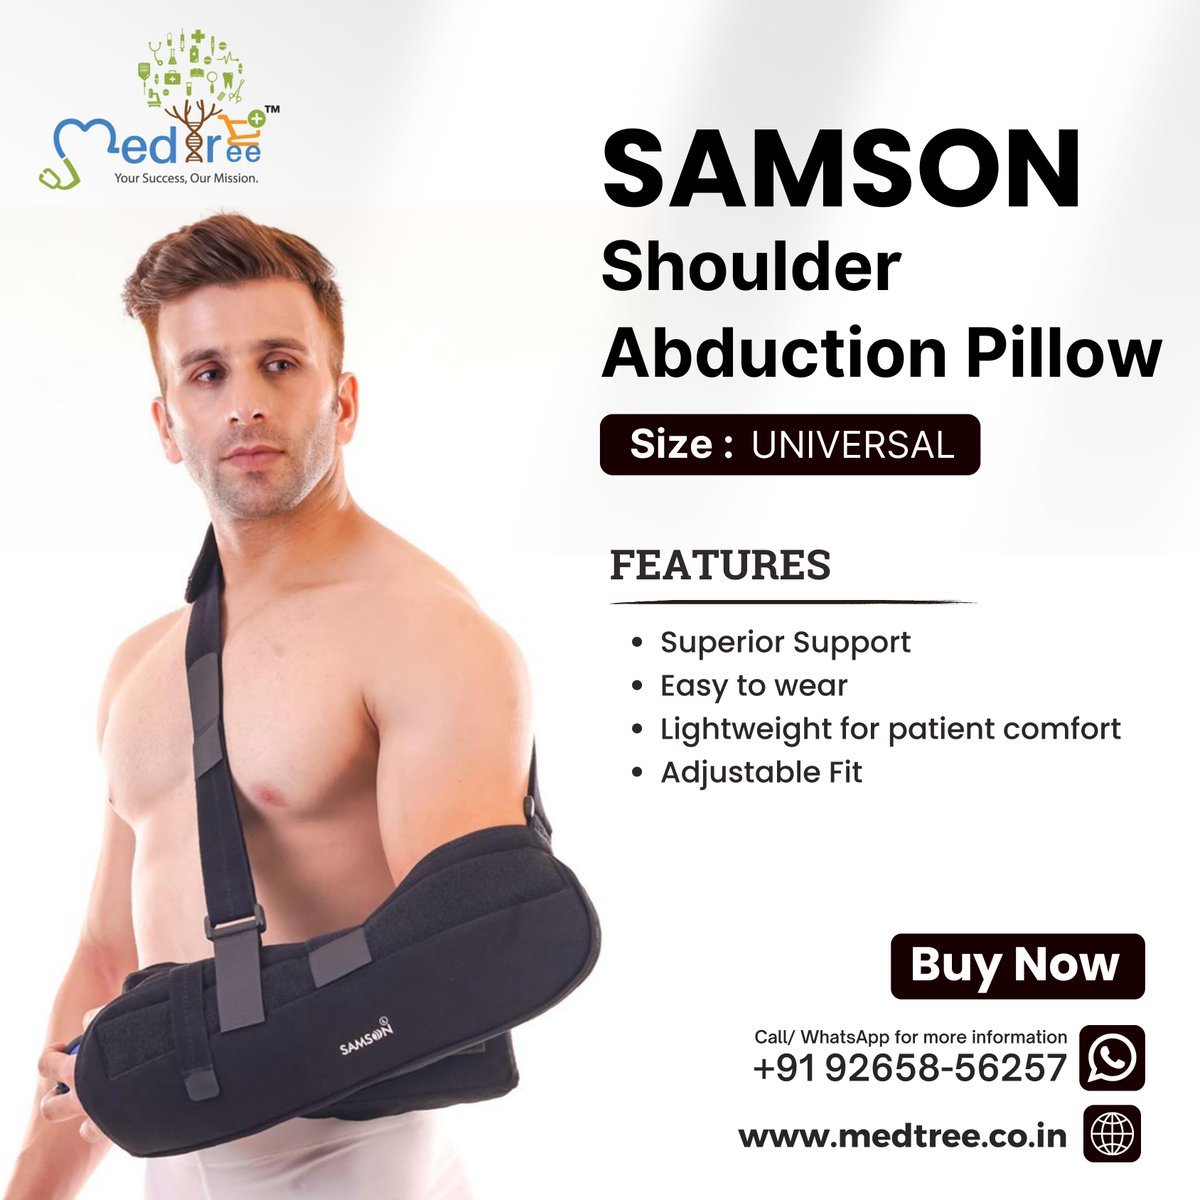 Shoulder Abduction Pillow
Buy Now : medtree.co.in/product/should…

#abductionpillow #shoulderpillow #shoulderpain #shoulderpainrelief #shouldersupport #shouldersupports #Orthopedics #orthopediccare #orthopaedics #orthopaediccare #medtreeindia #MedTree